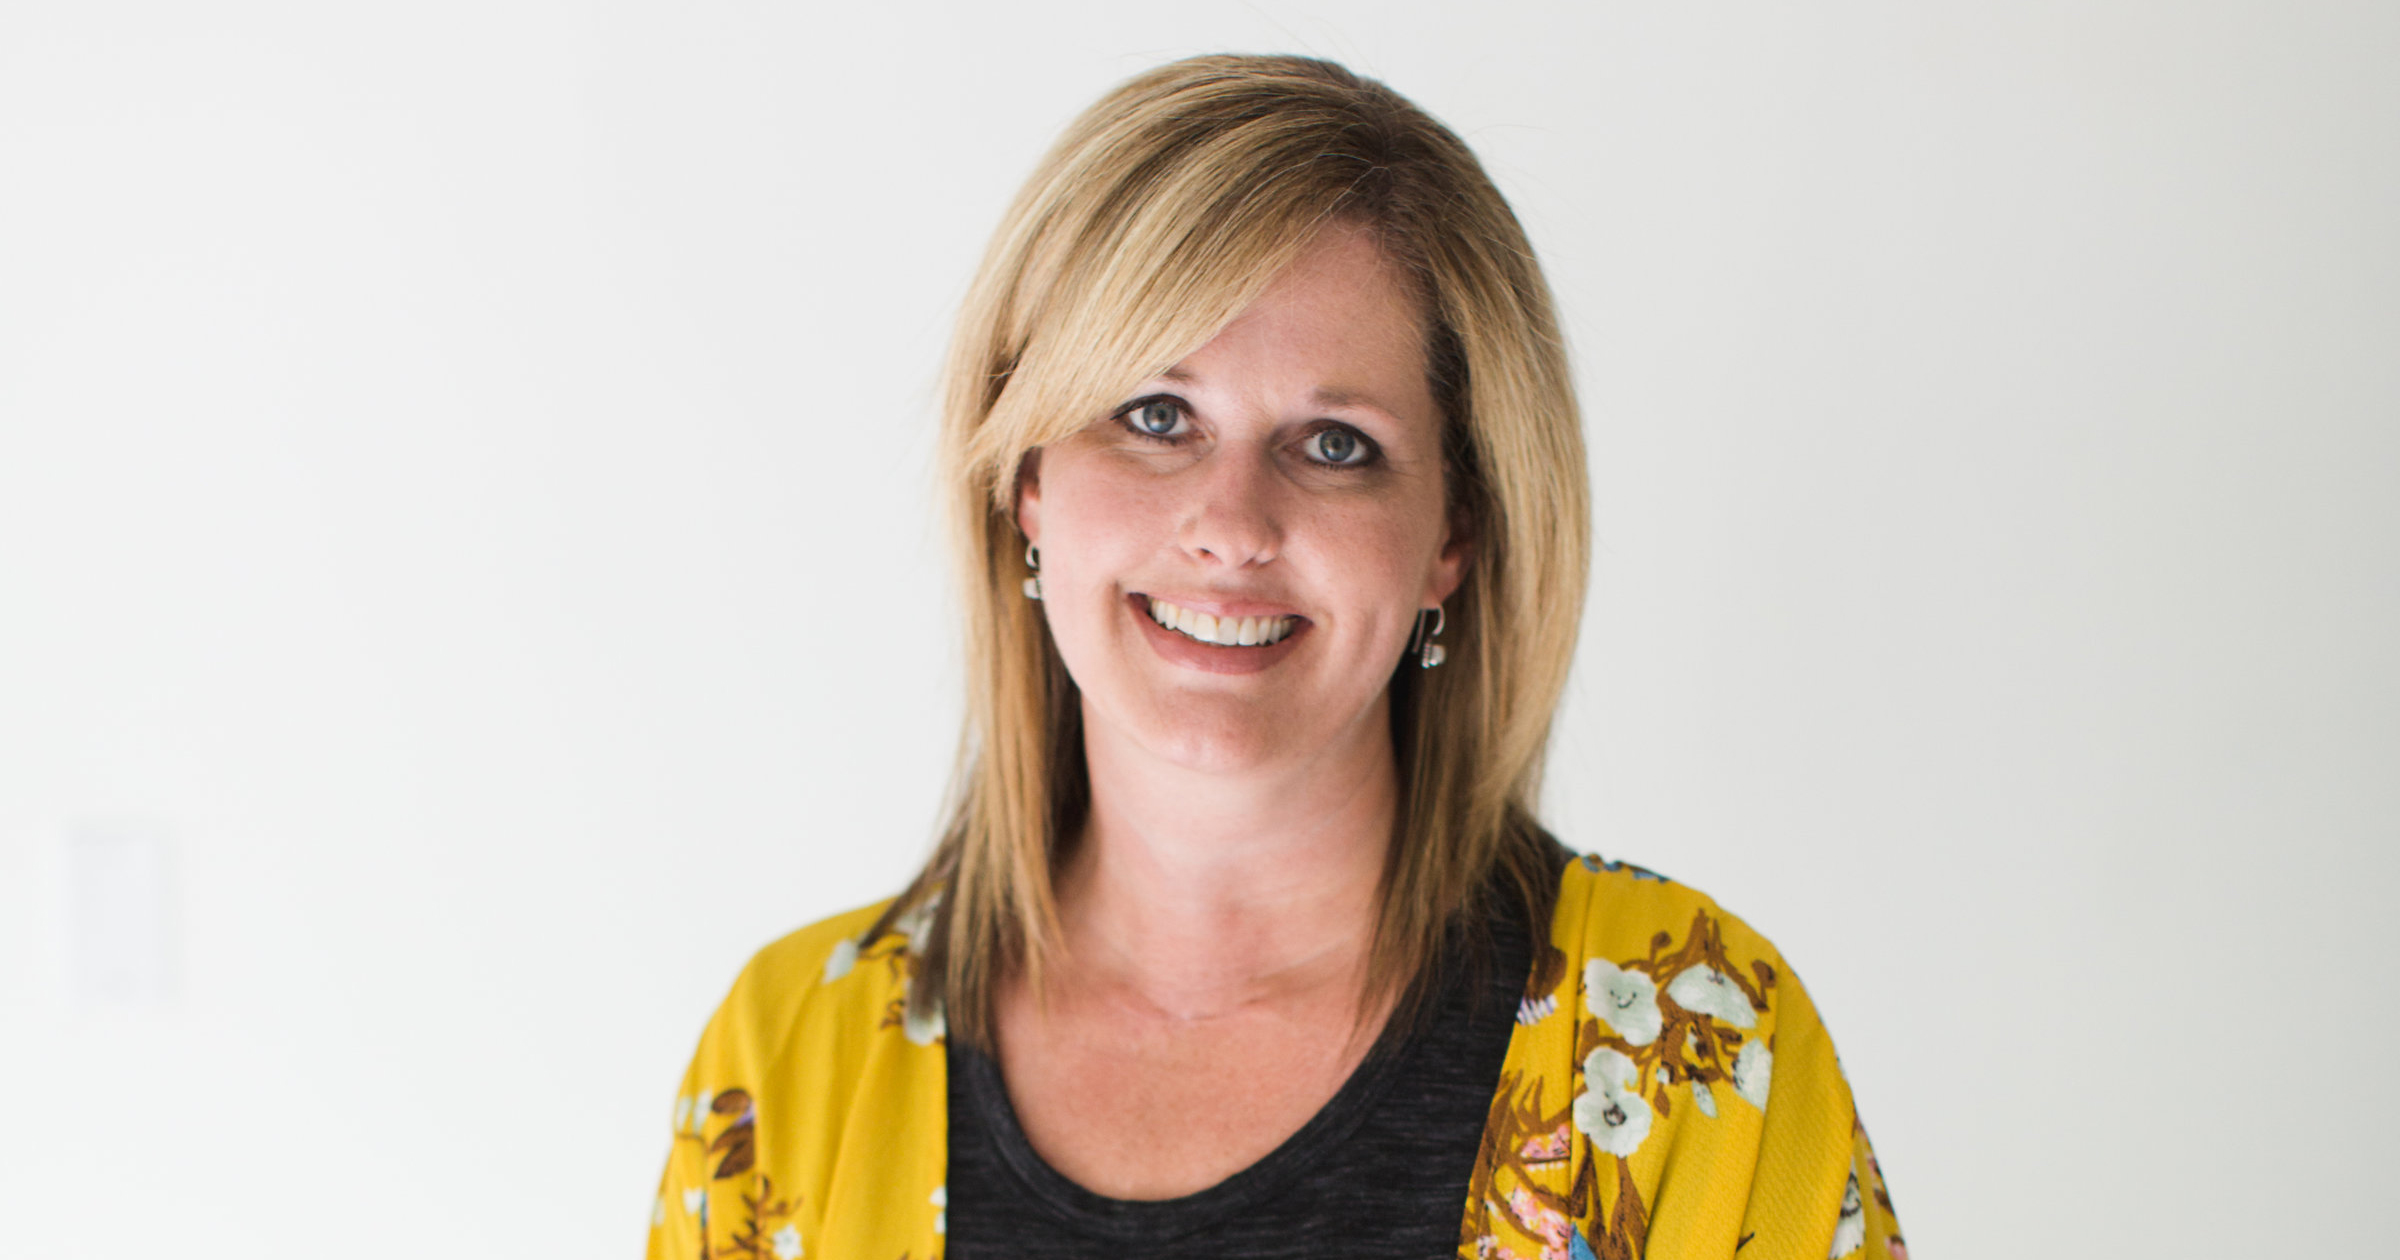 Today we're chatting with our Chief Human Resources Officer, Dana Janssen. She shares her career in learning and development, the best professional advice she's been given and 3 surprising truths you might not know!